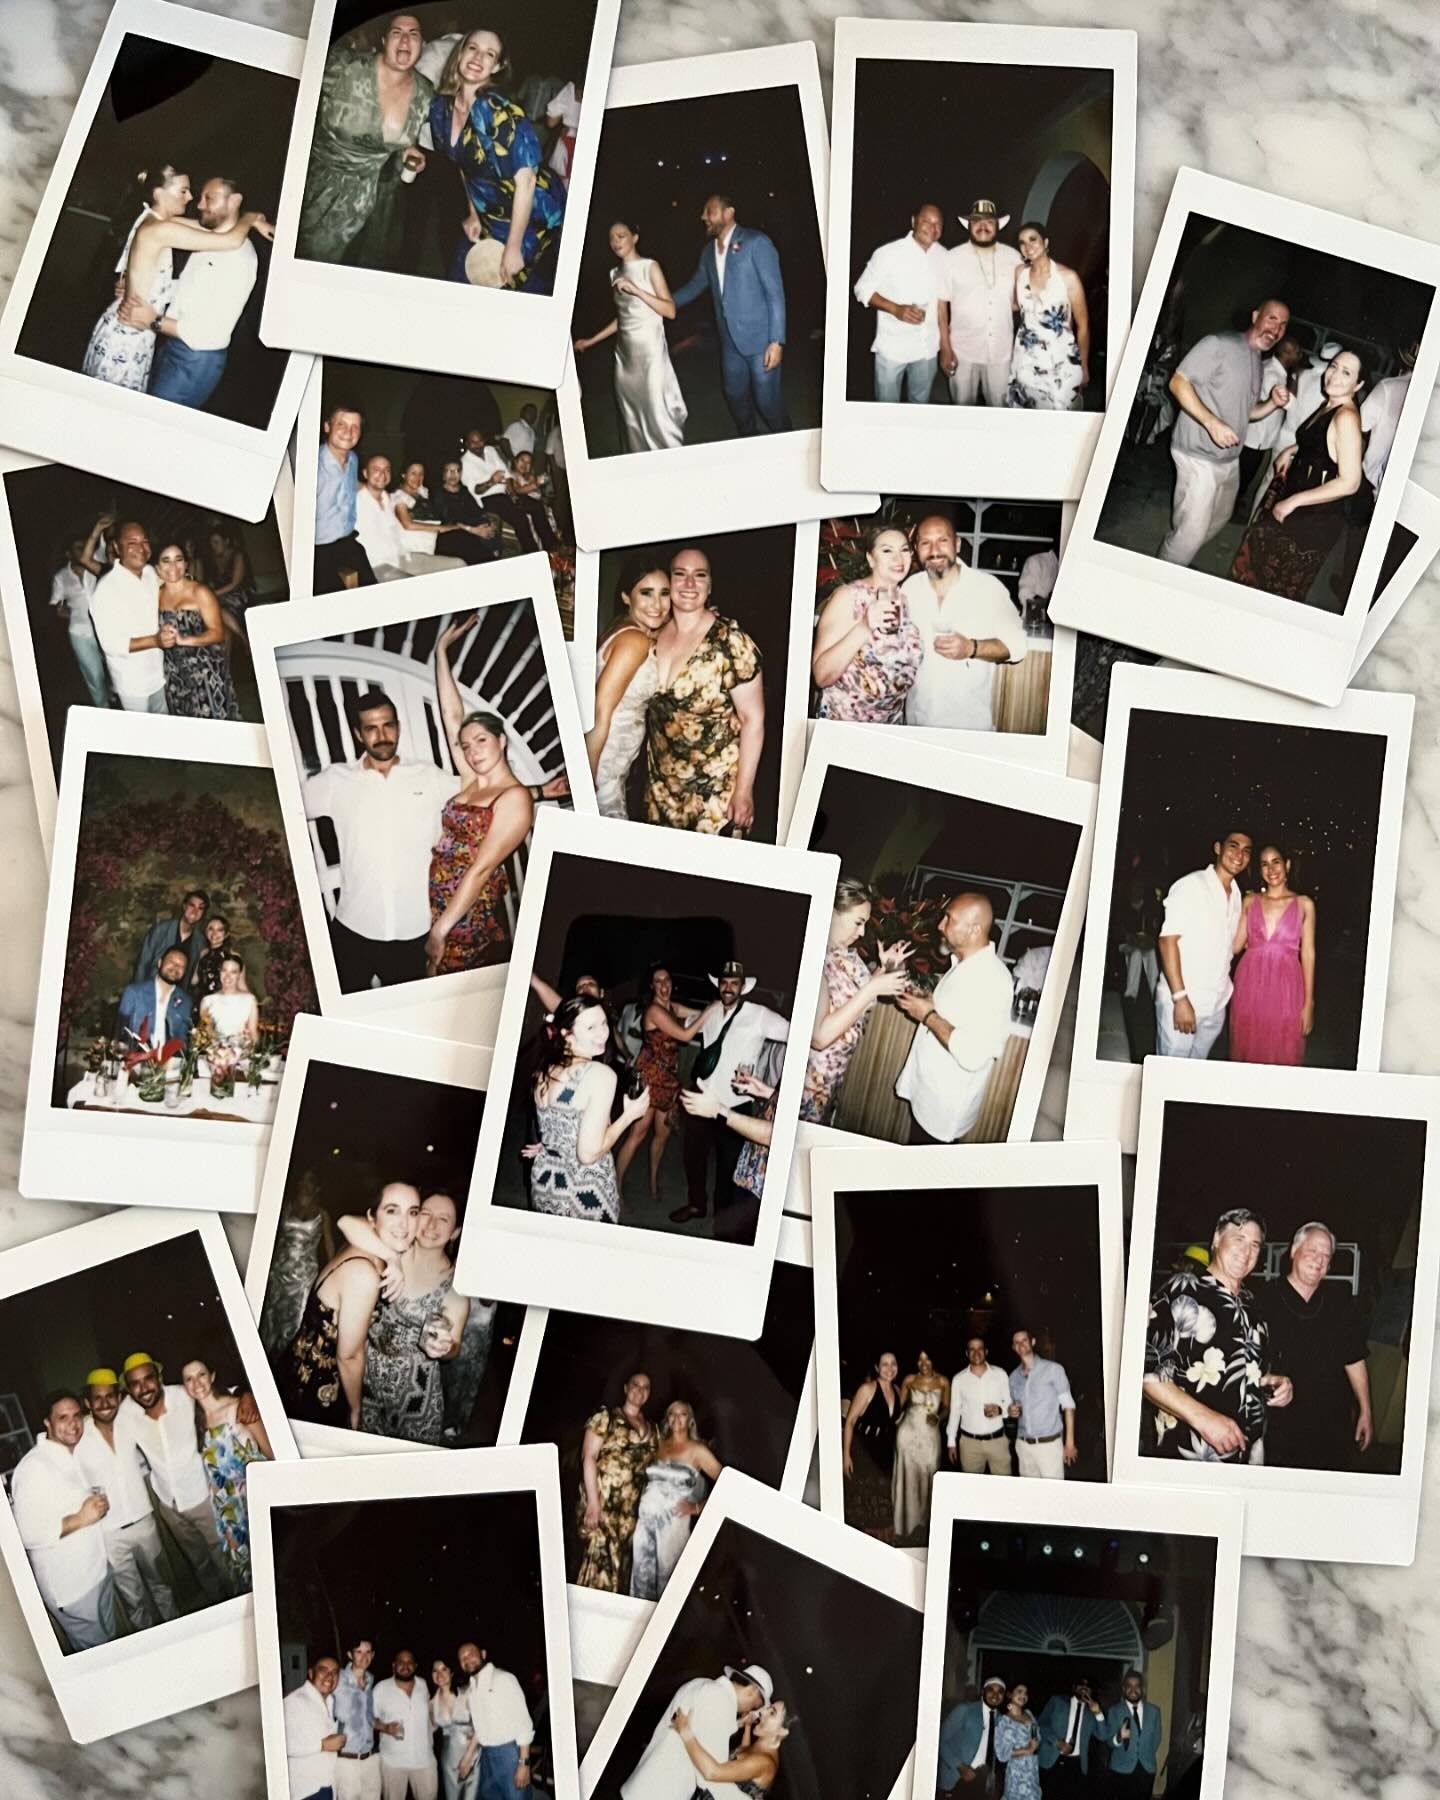 Polaroids from our wedding reception, aka the reggaeton dance party of my dreams! Thank you to @whitneyairen for capturing these moments and to everyone on the dance floor who endured me attempting to sing every word to &ldquo;Gasolina.&rdquo;